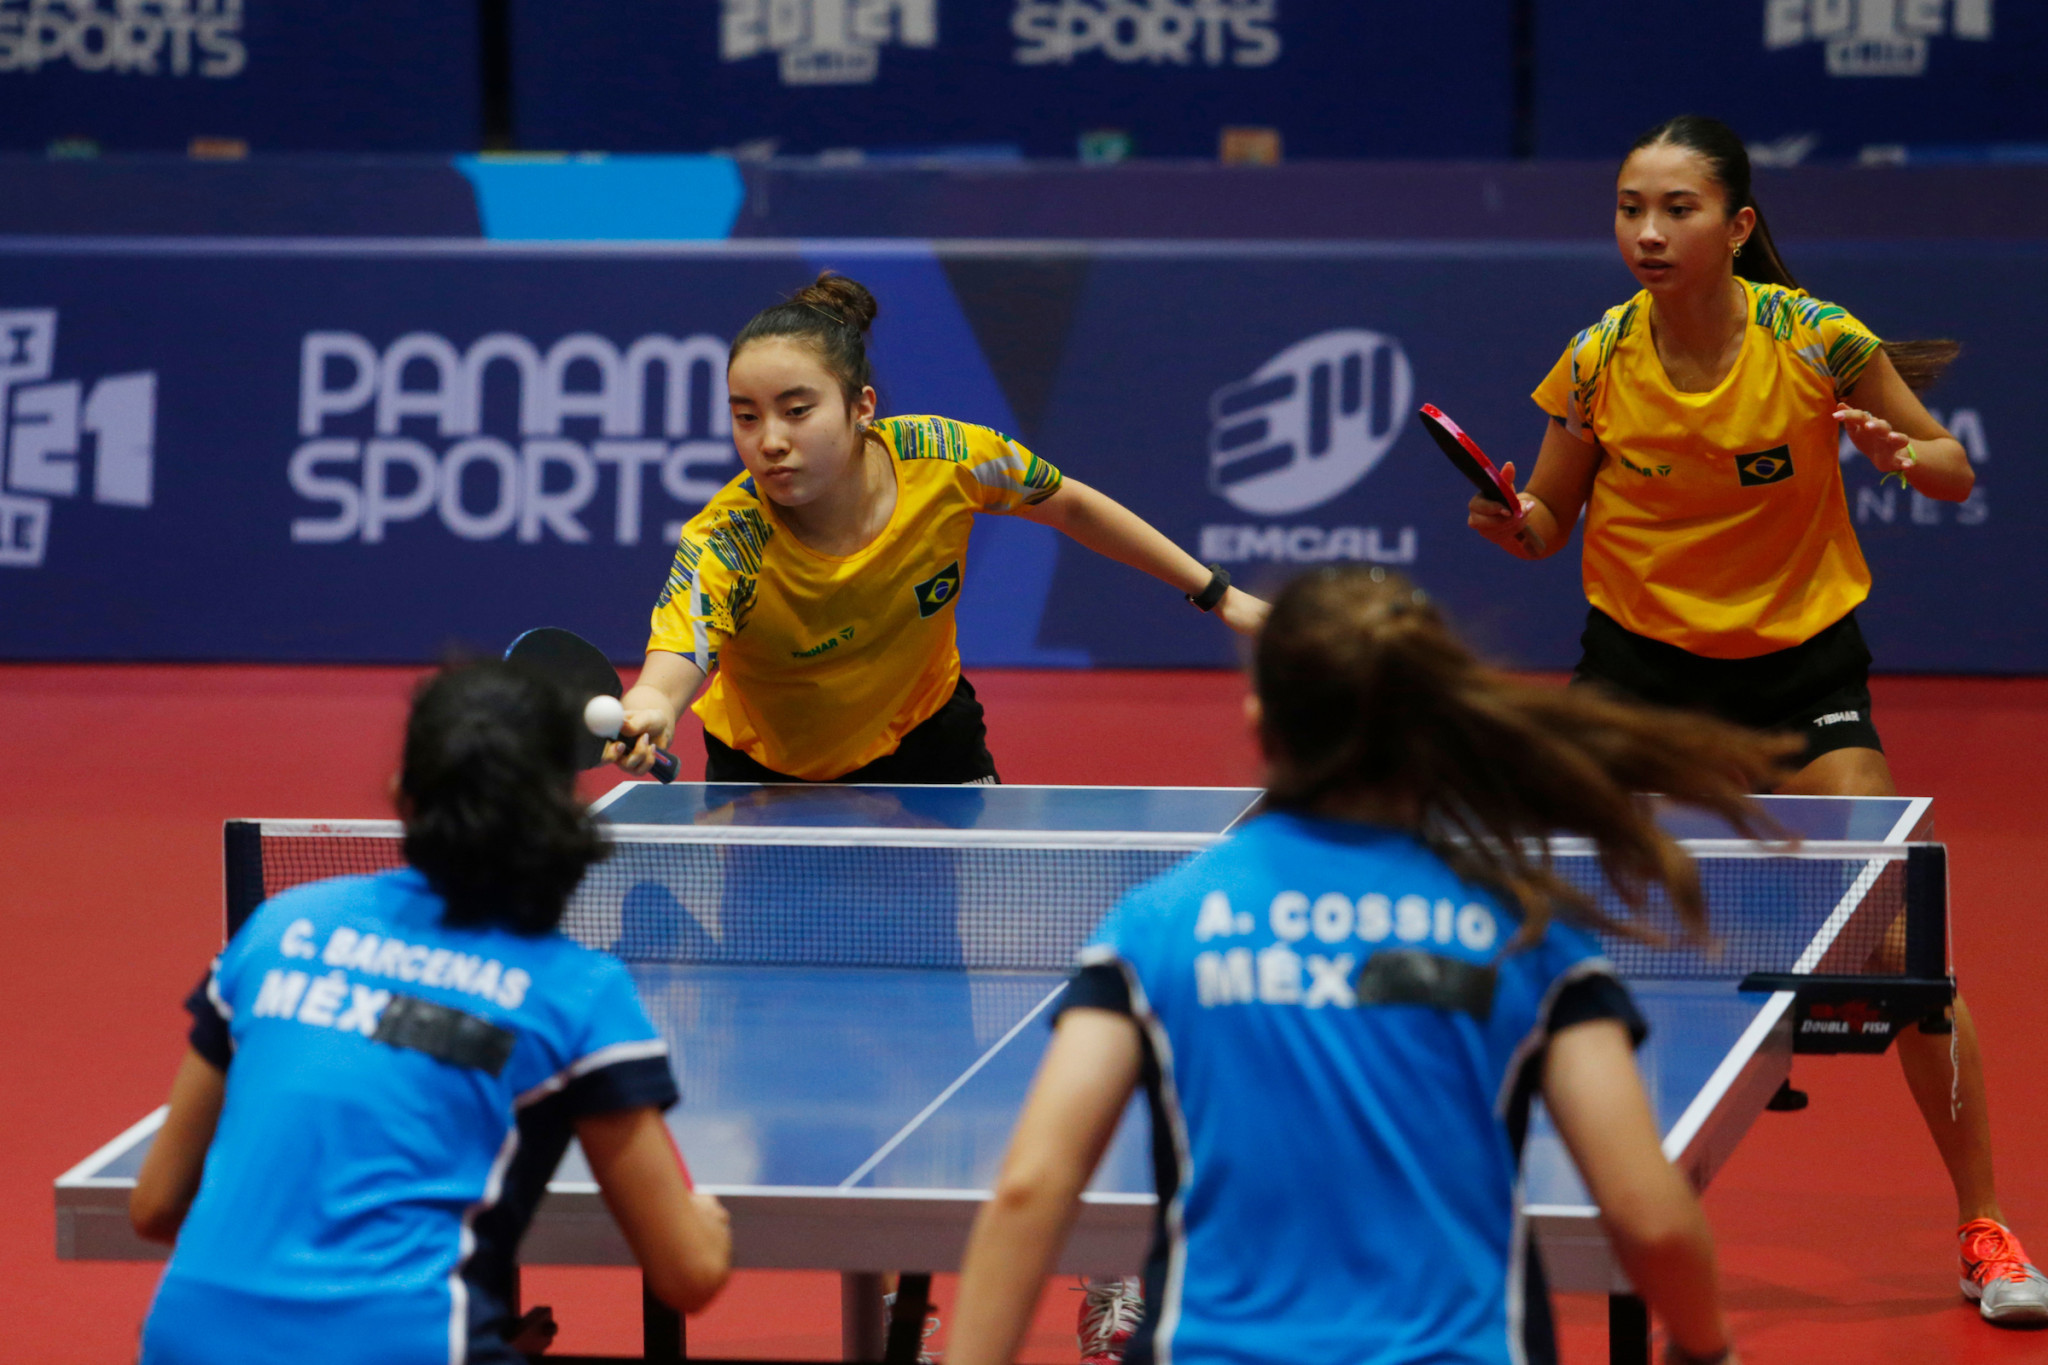 Brazil won 3-1 against Mexico in the women's table tennis team gold medal match ©Agencia.Xpress Media